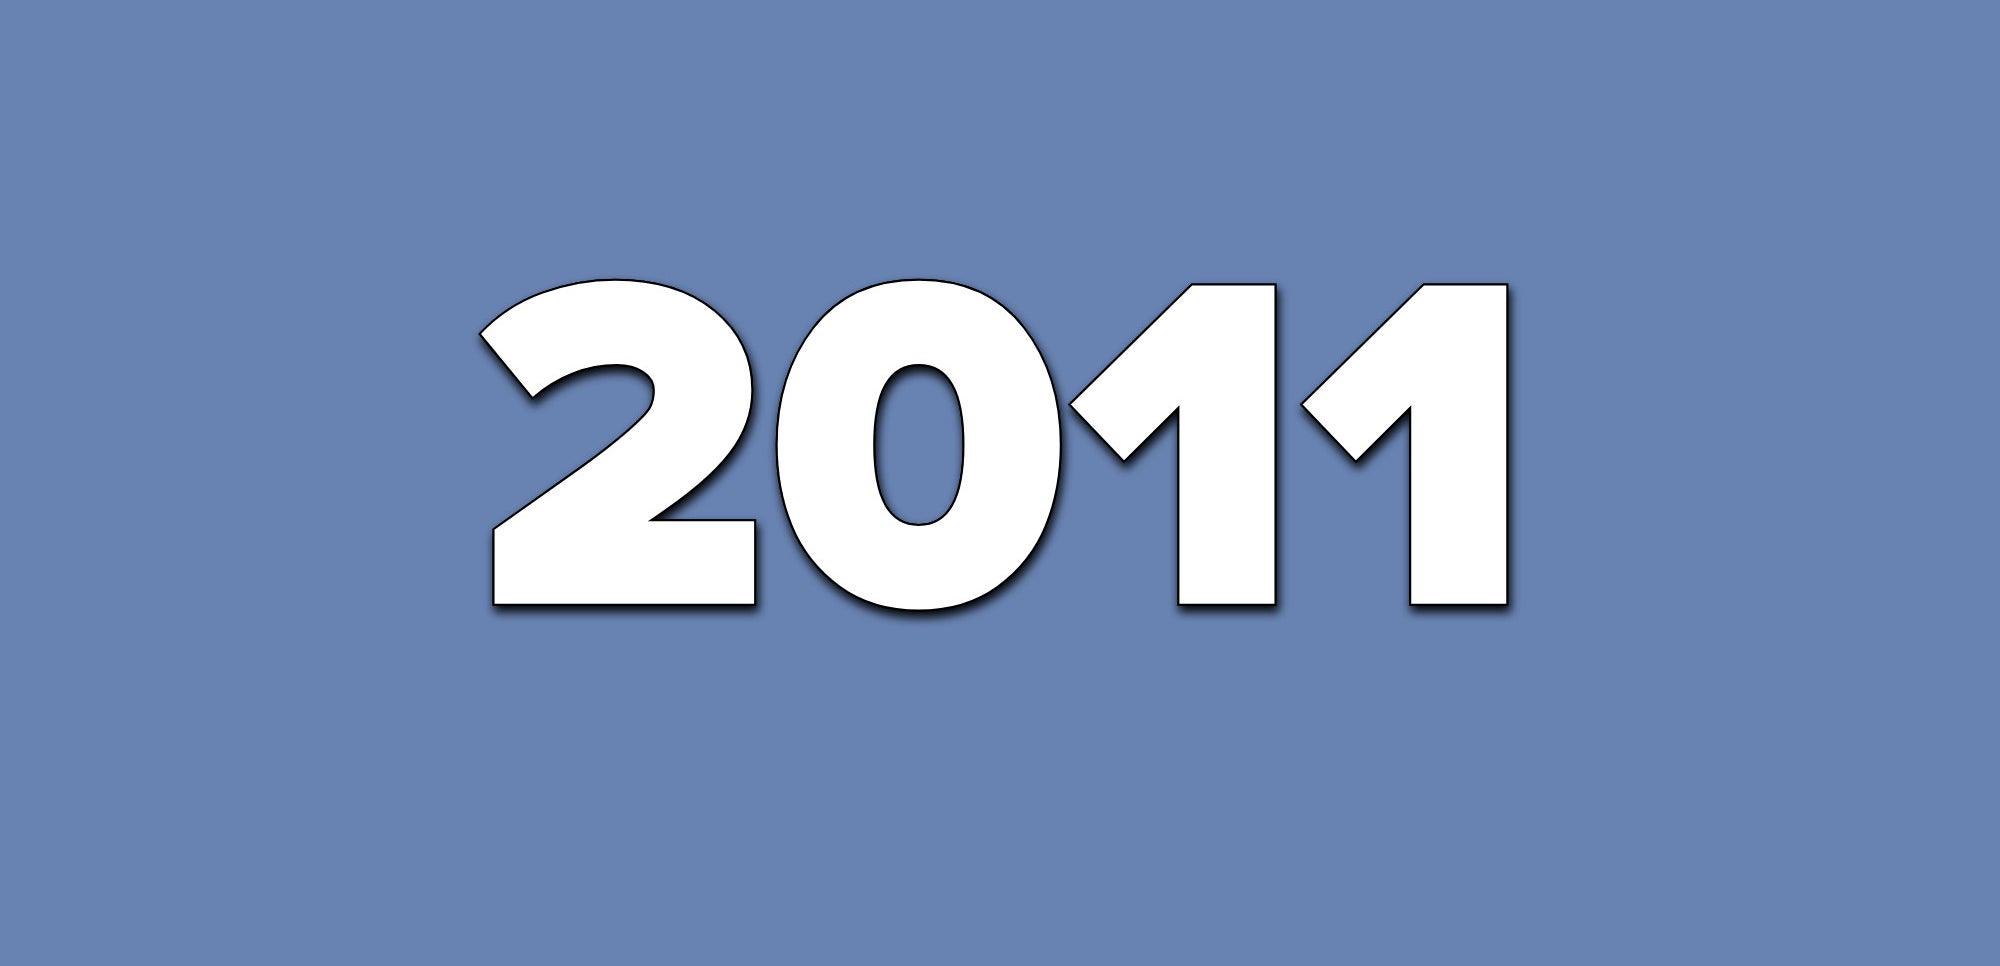 A blue background with text that says 2011